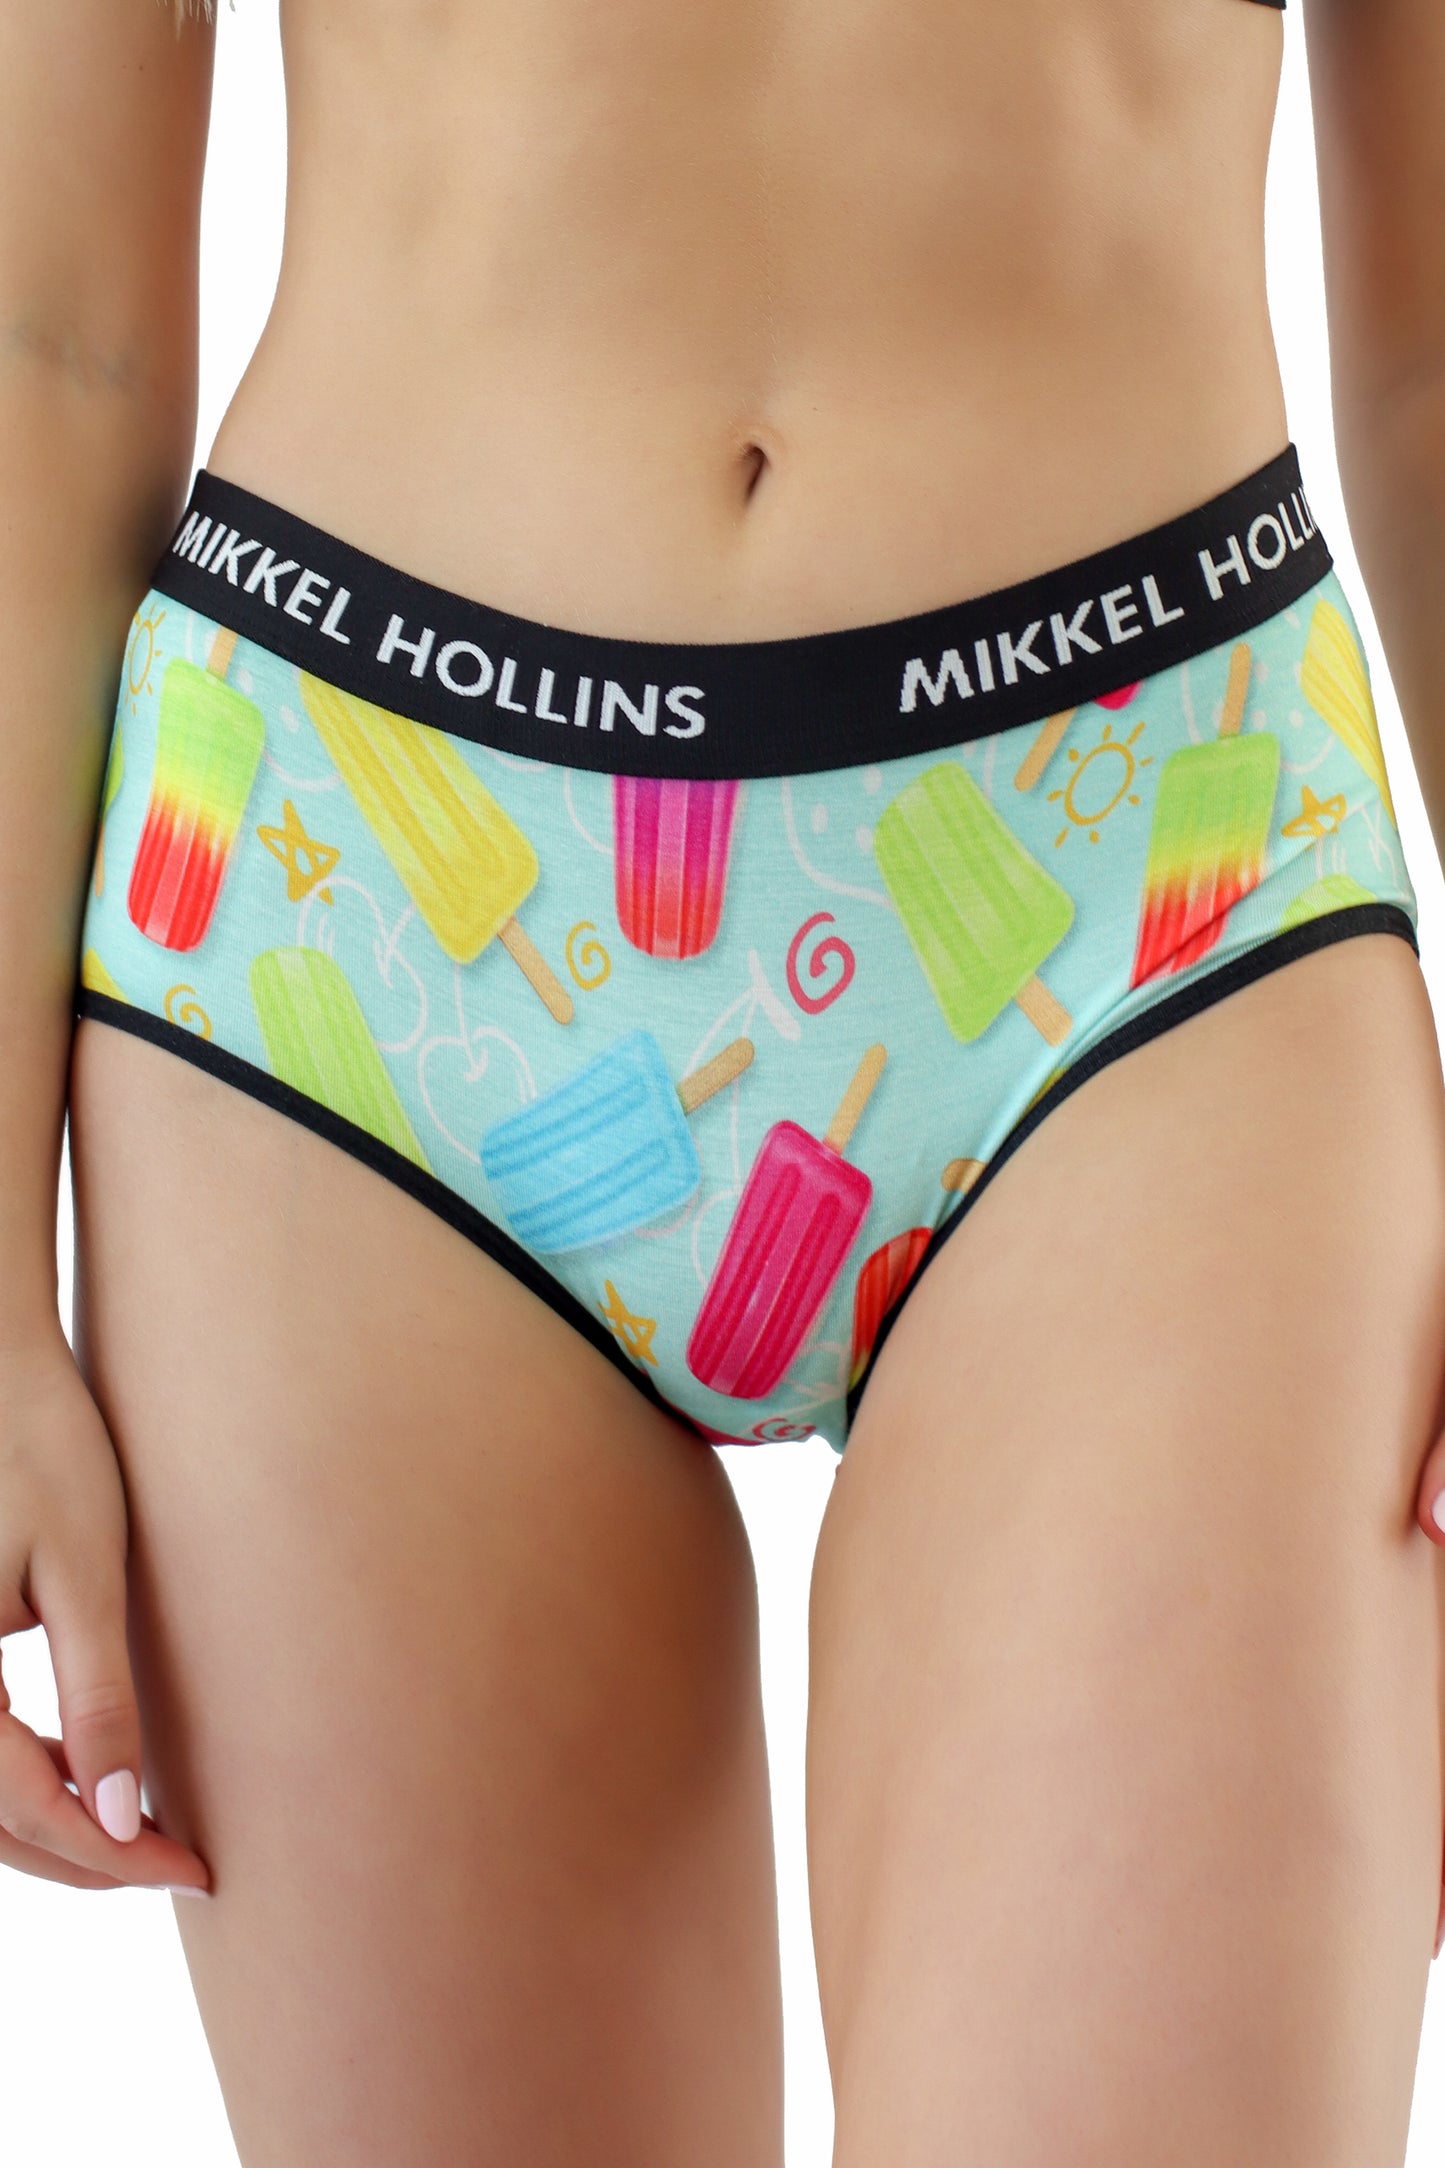 Popsicles - Hipster Panties For Women, Ultra soft Tencel